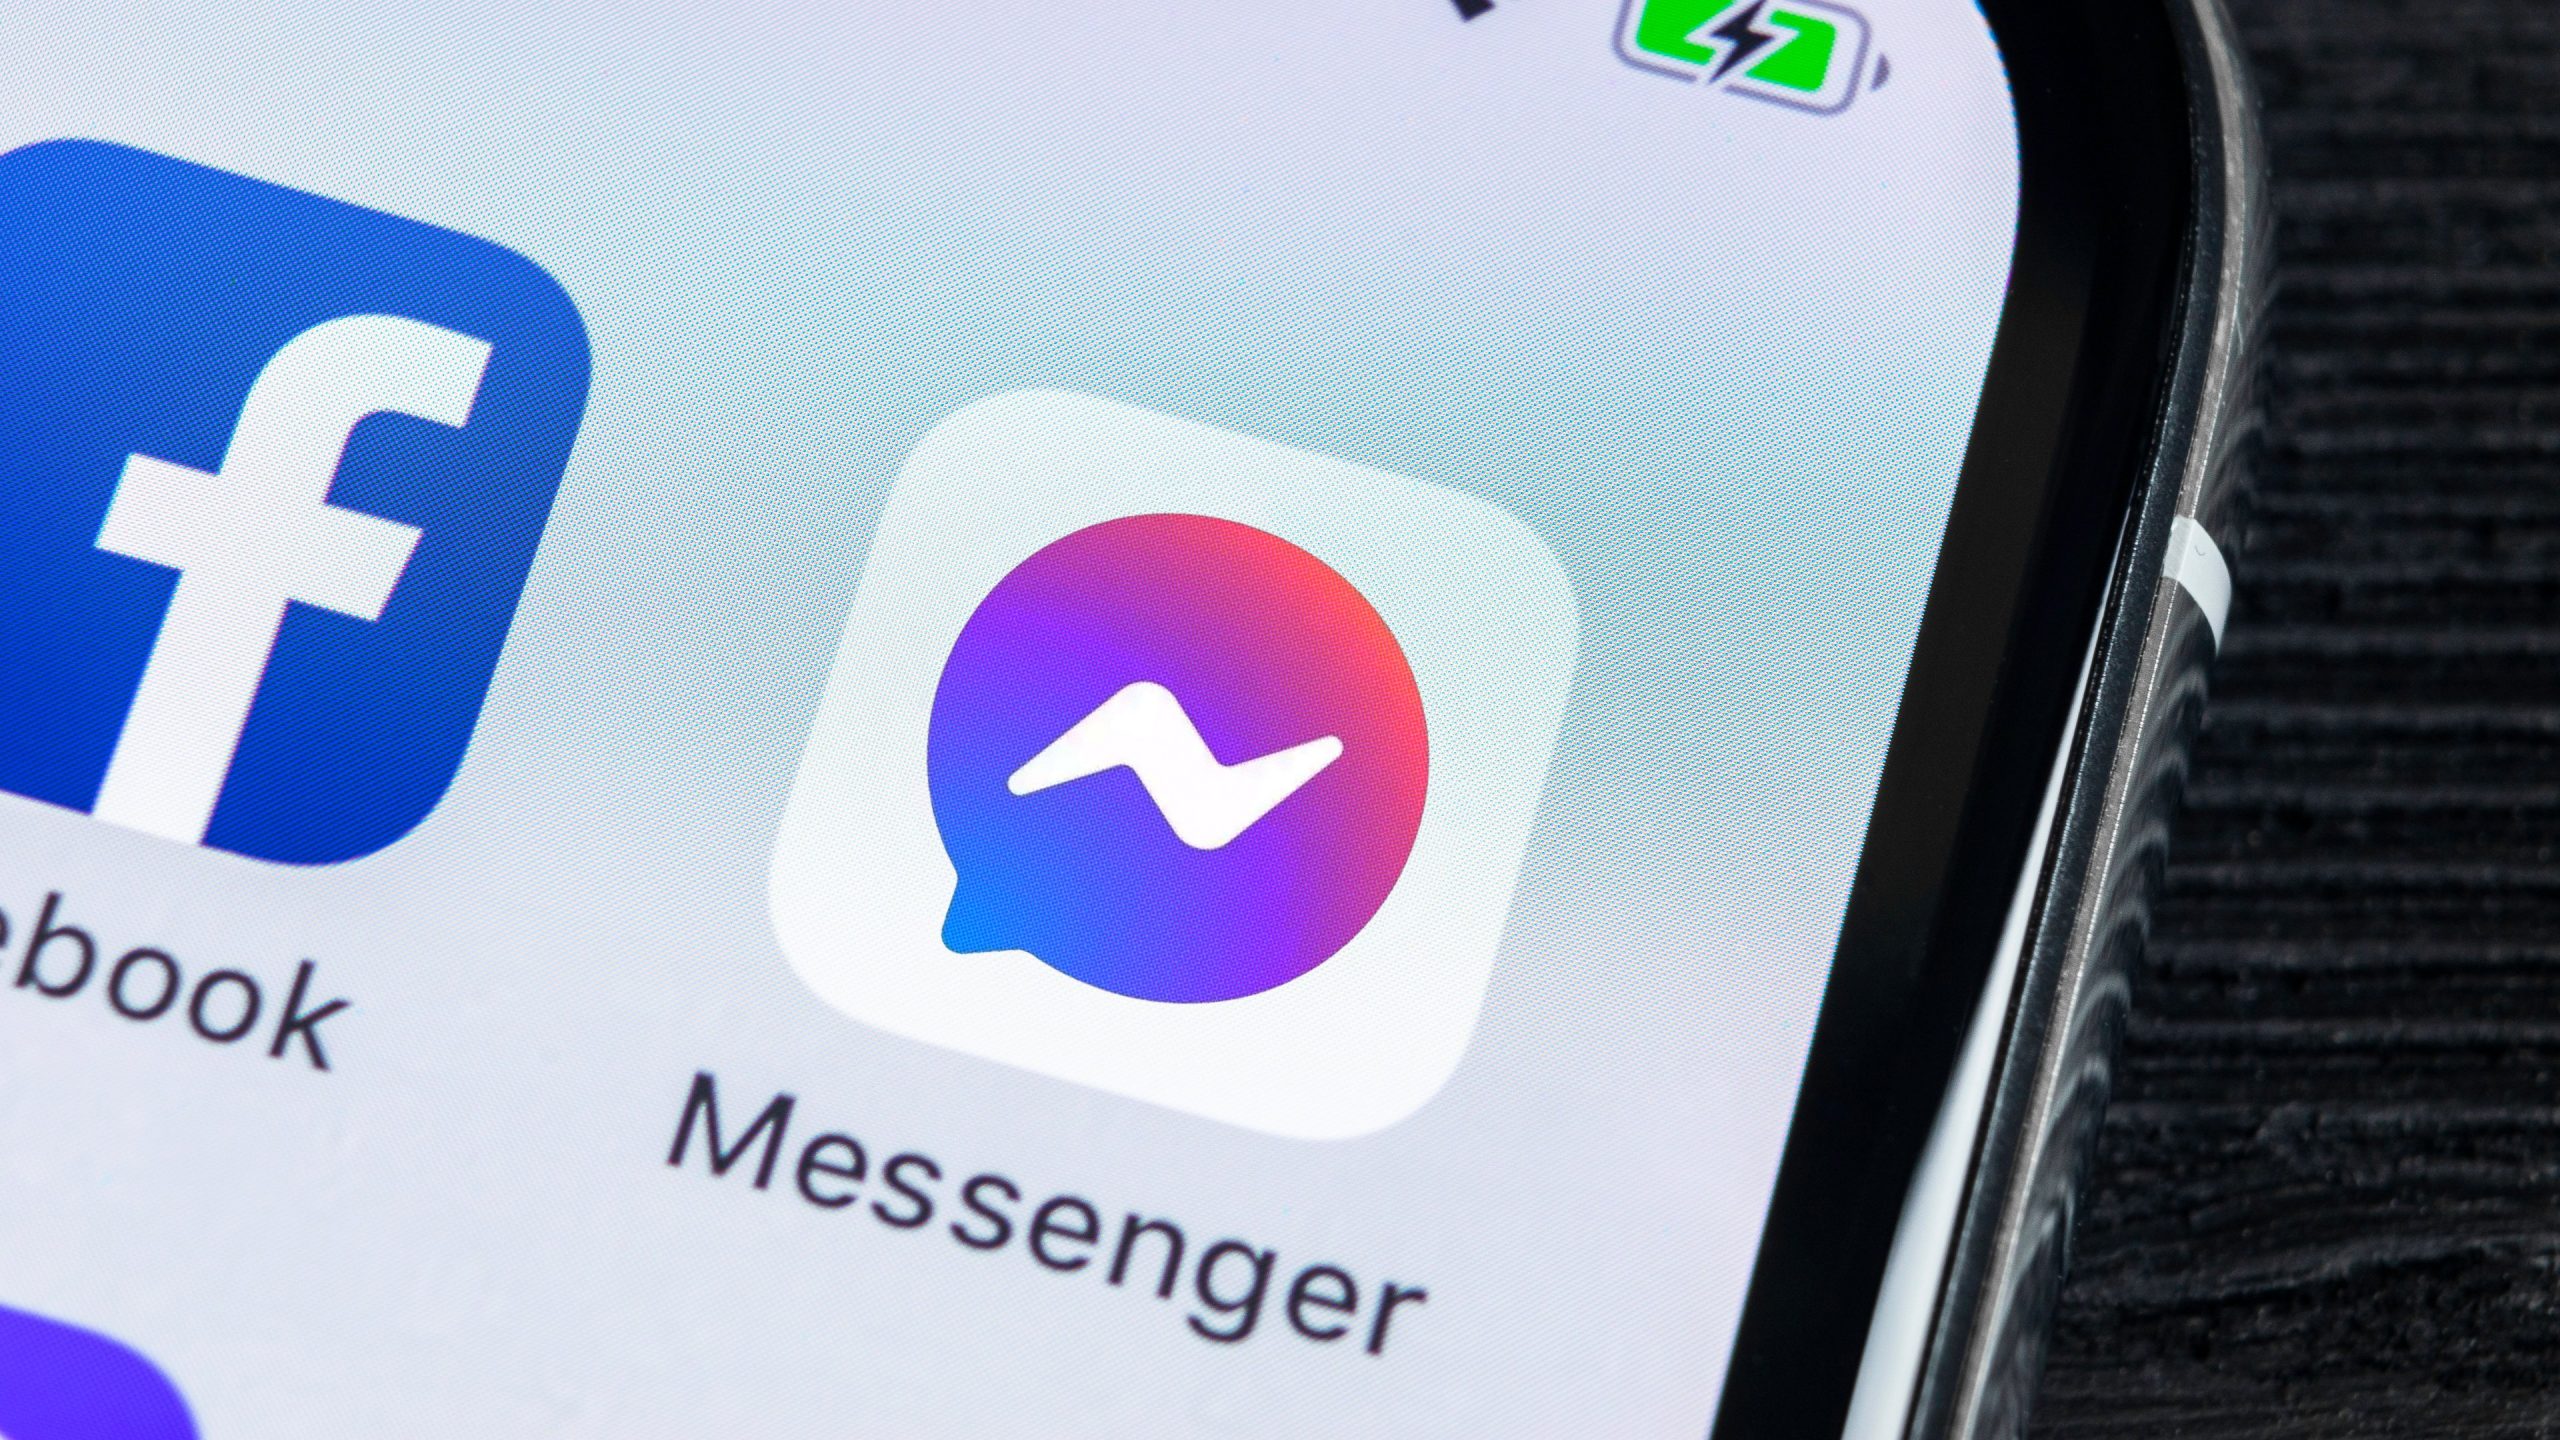 Facebook Messenger will now notify you when someone screen shots a disappearing message